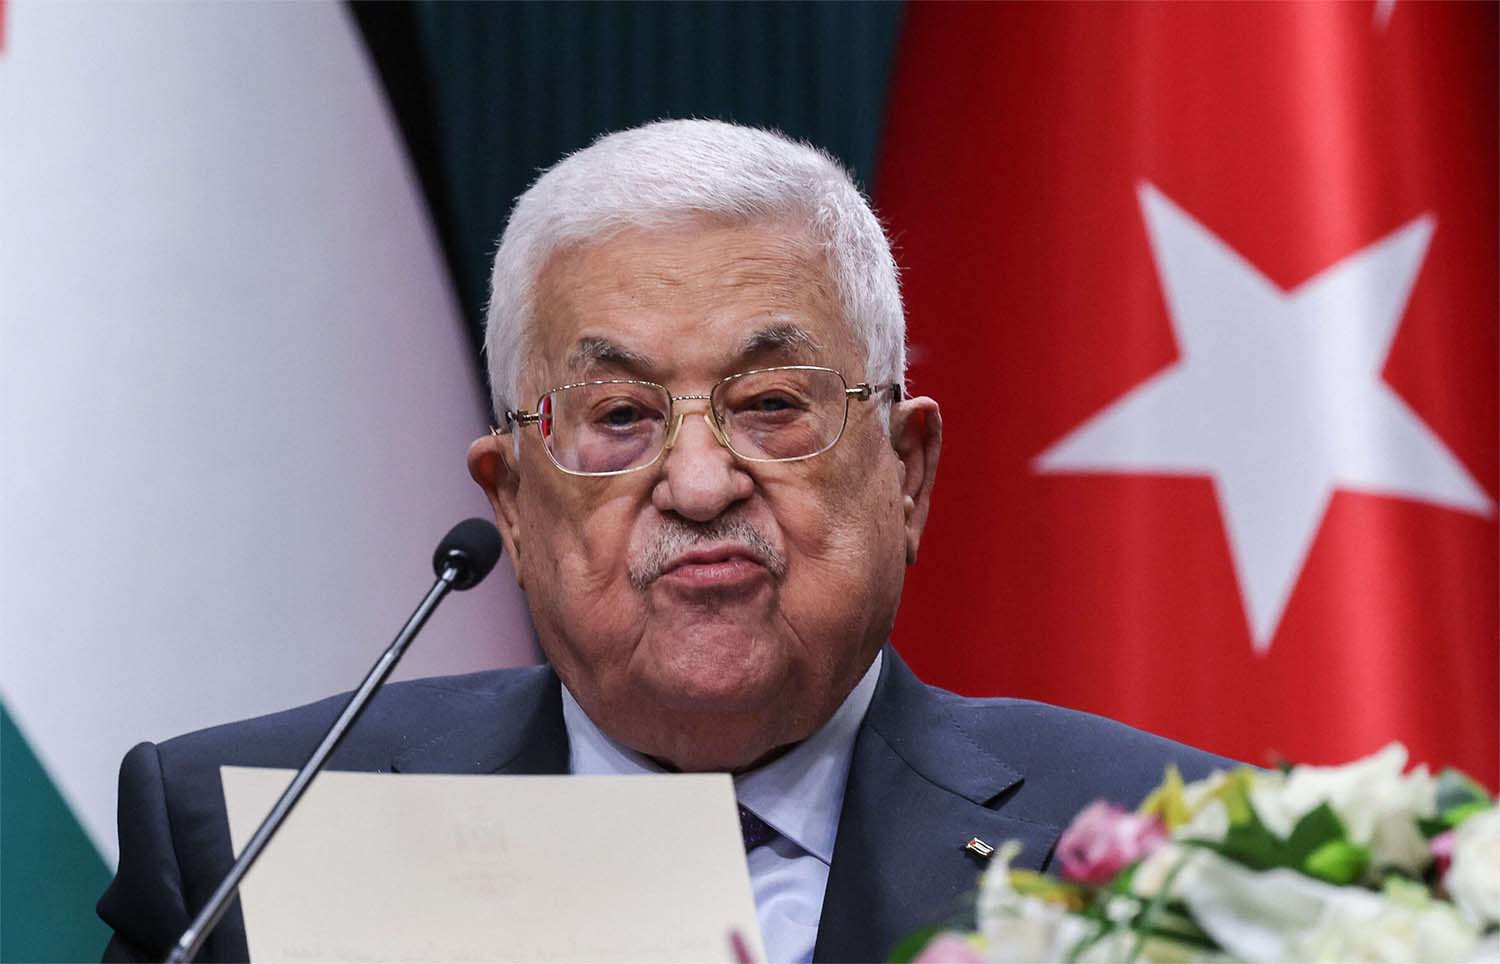 Abbas said Jews were targeted by Nazi Germany because of their "social role" rather than their religion